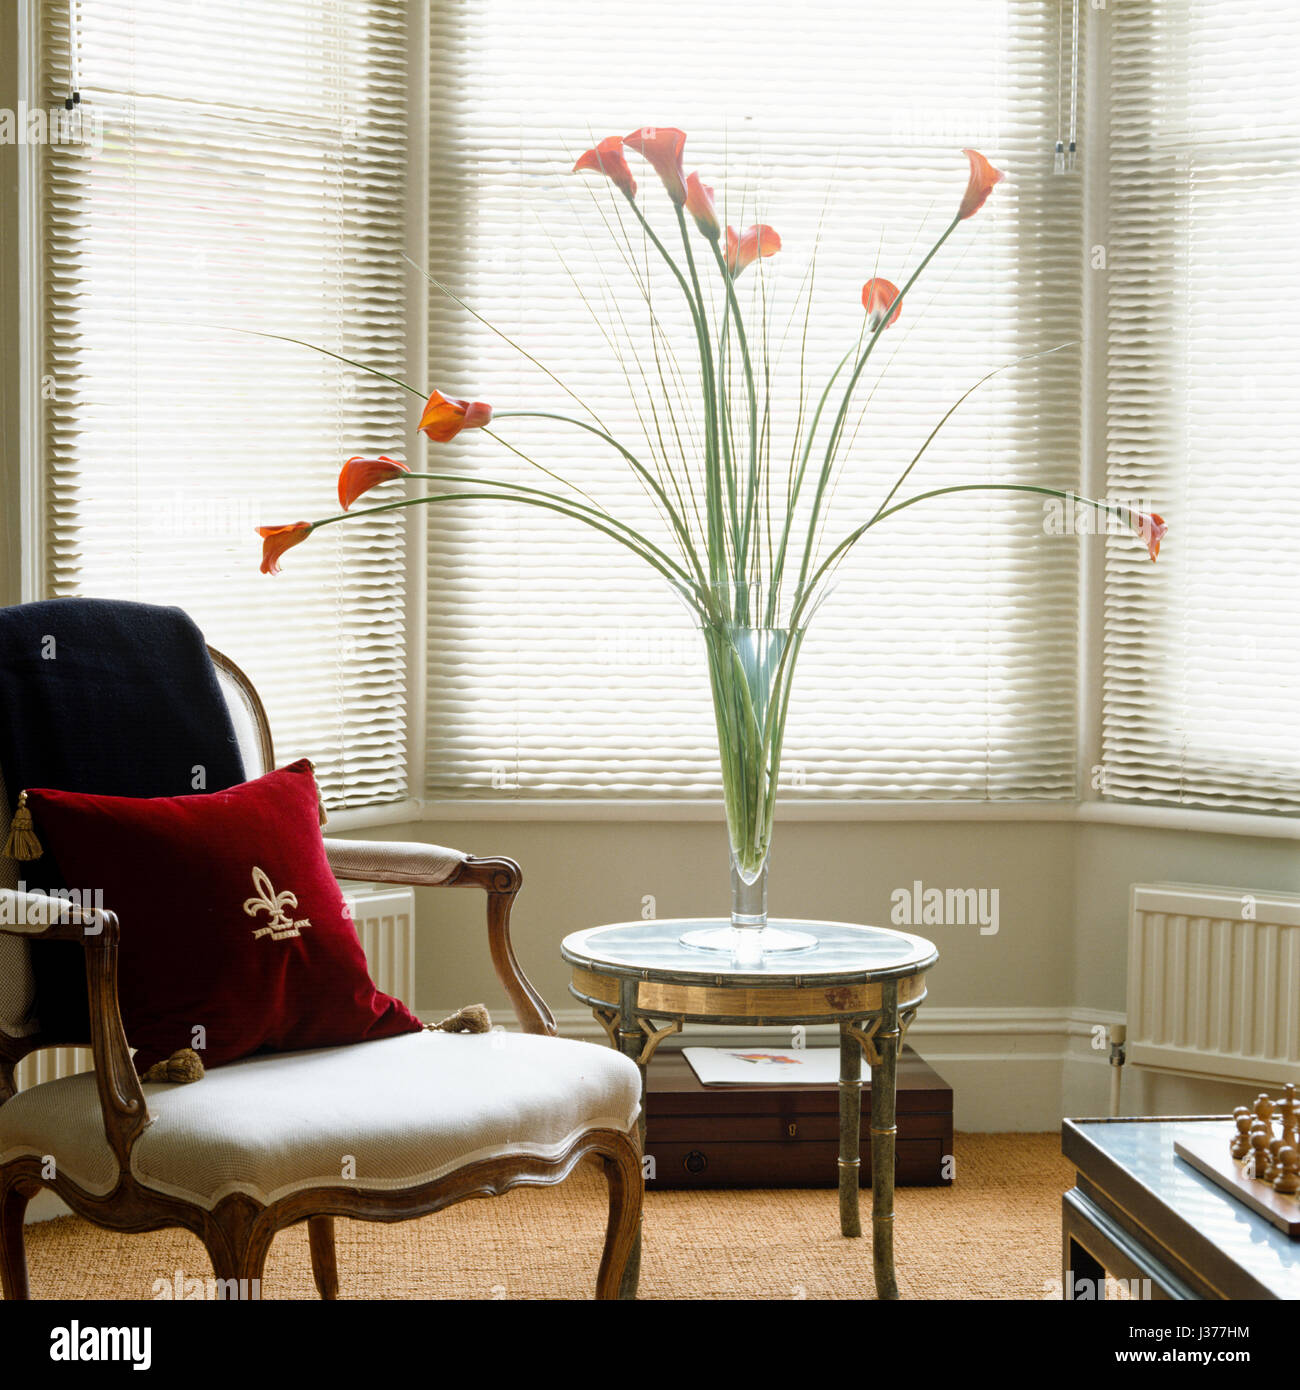 Chair beside side table with vase of flowers. Stock Photo